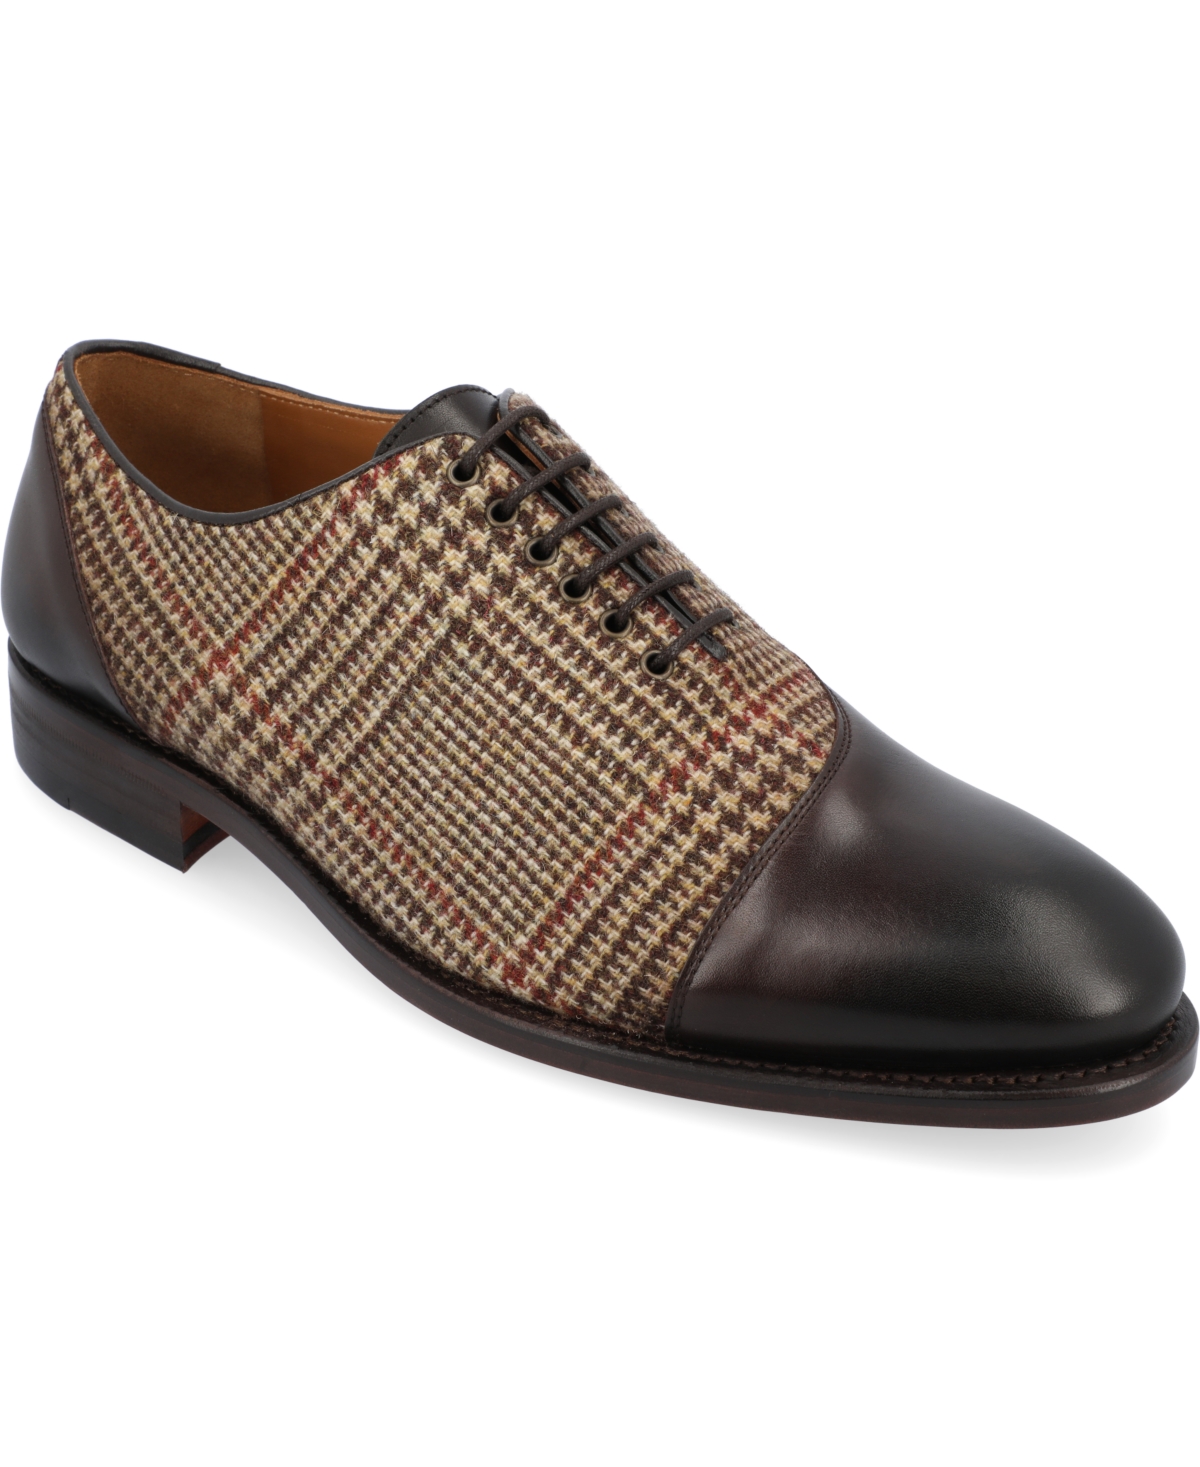 Men's Paris Handcrafted Leather and Wool Asymmetrical Oxford Lace-up Dress Shoes - Plaid